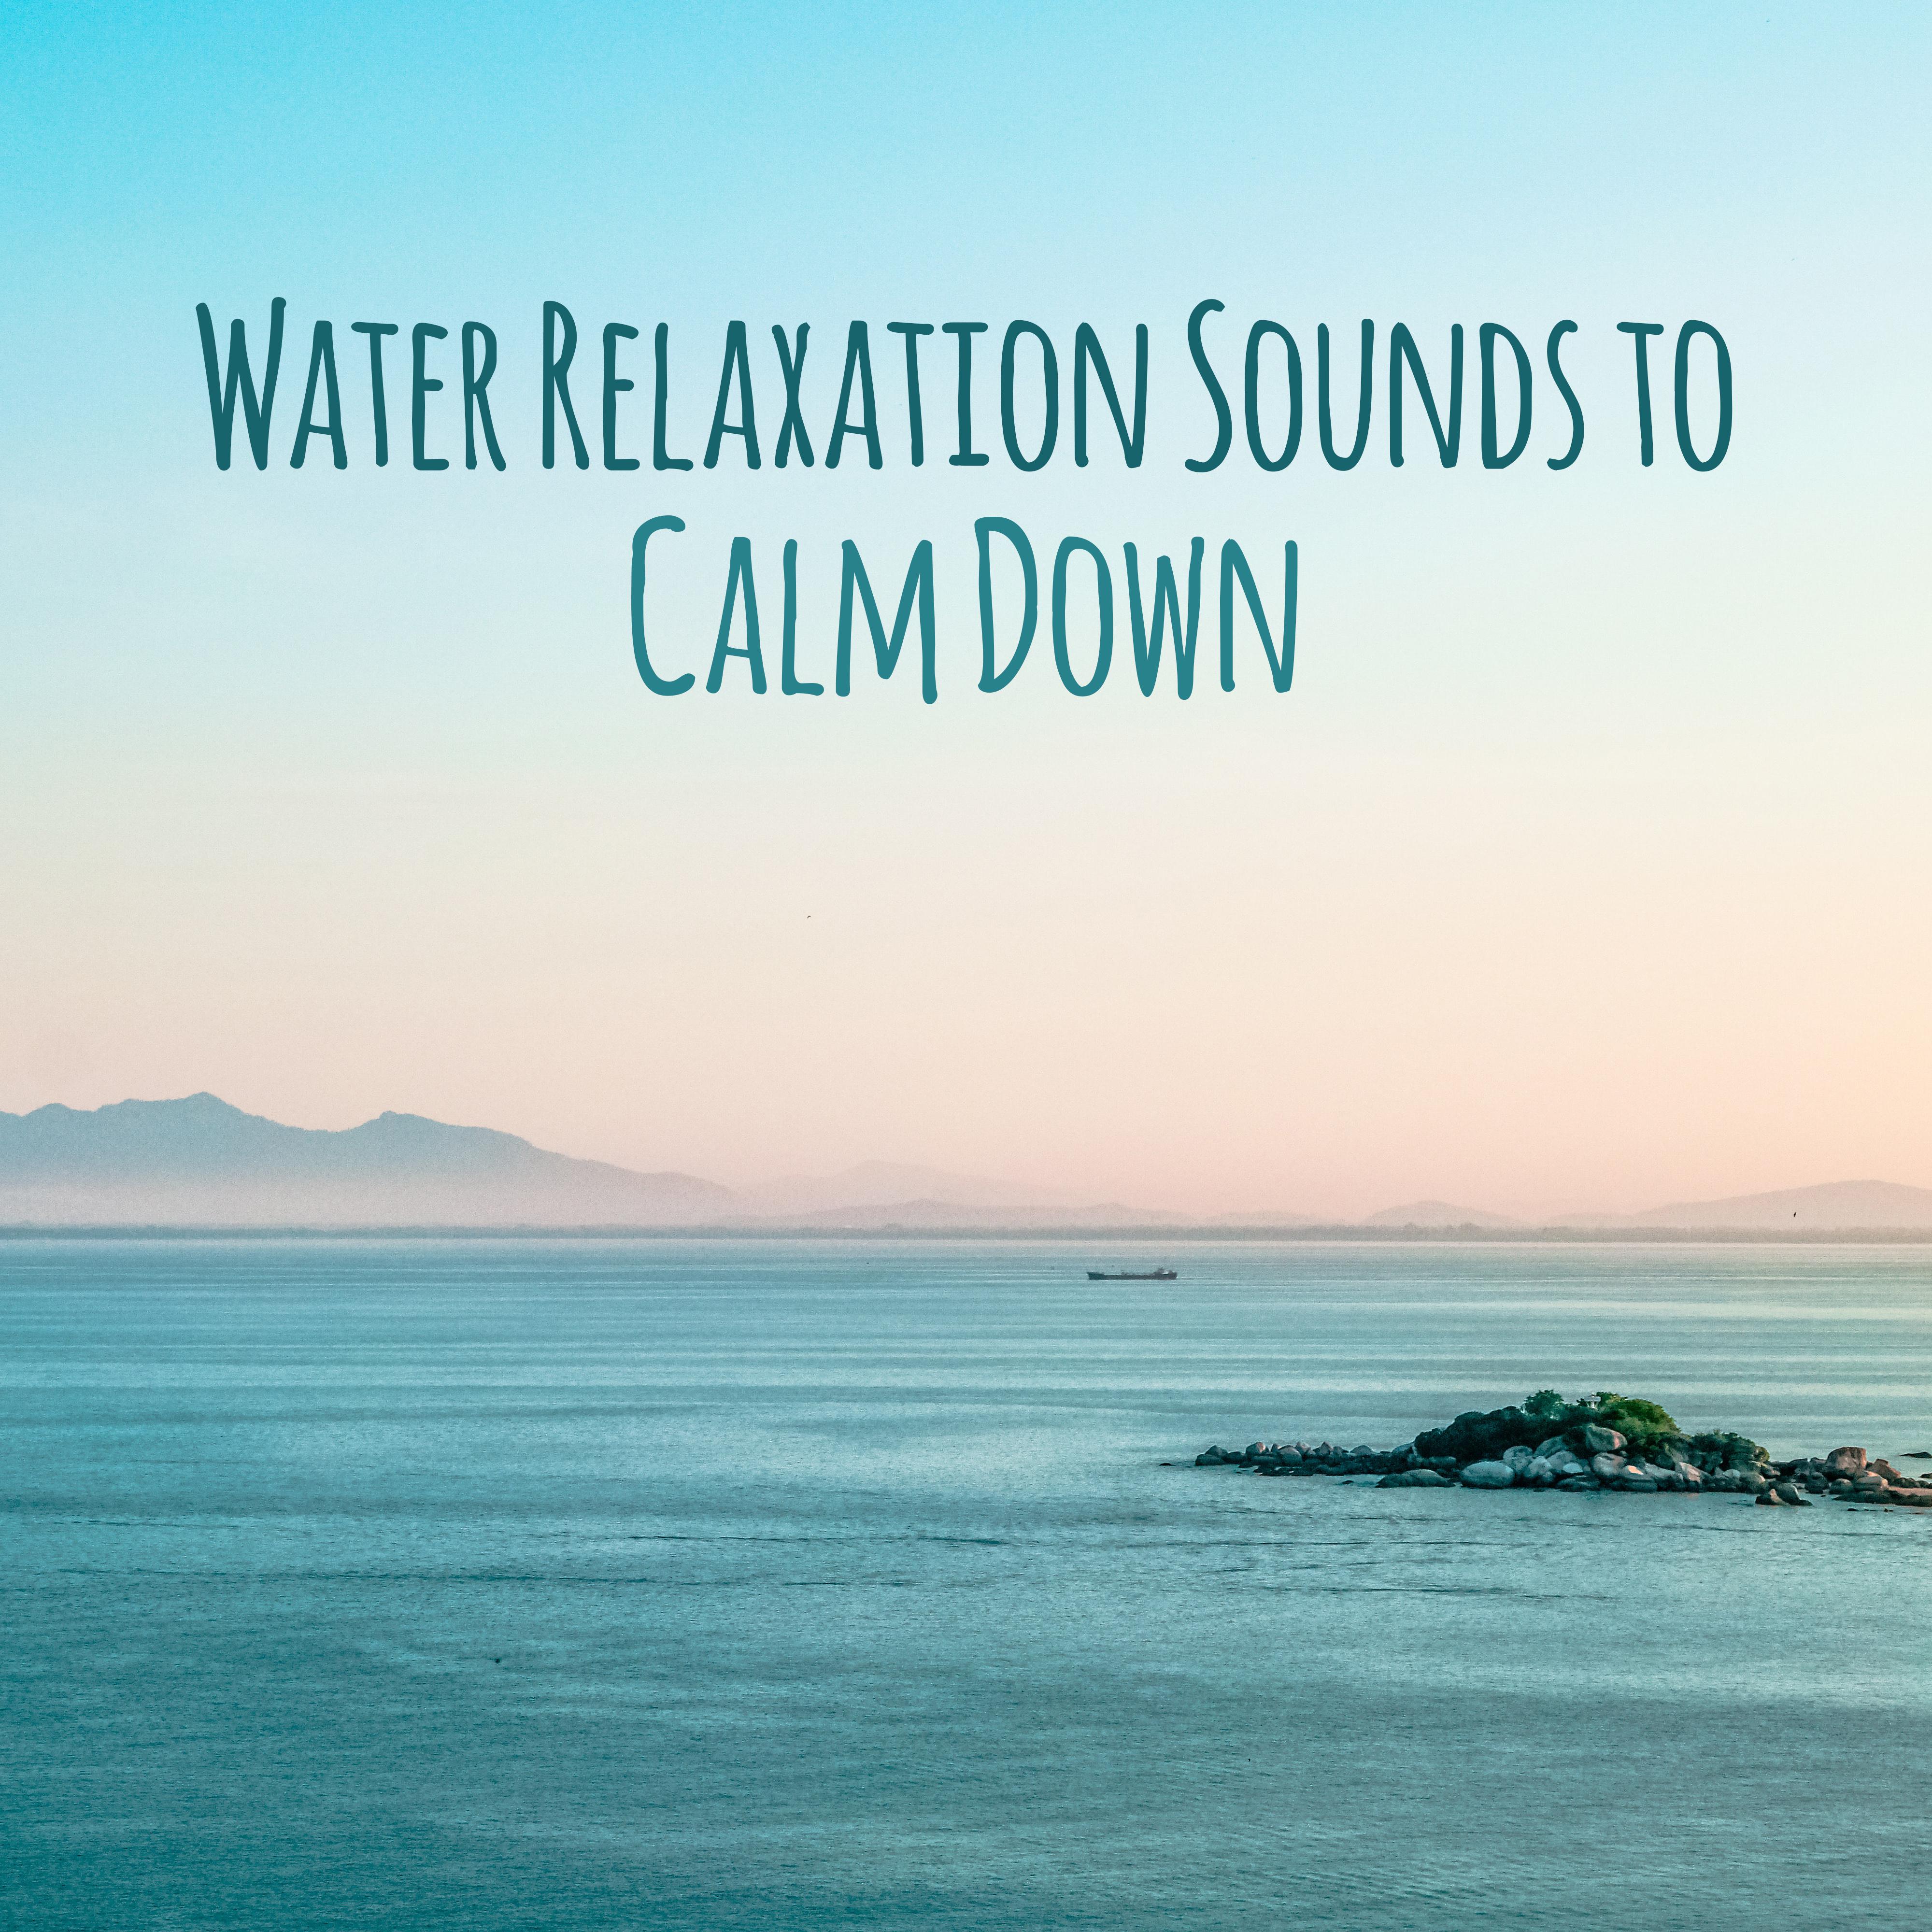 Water Relaxation Sounds to Calm Down